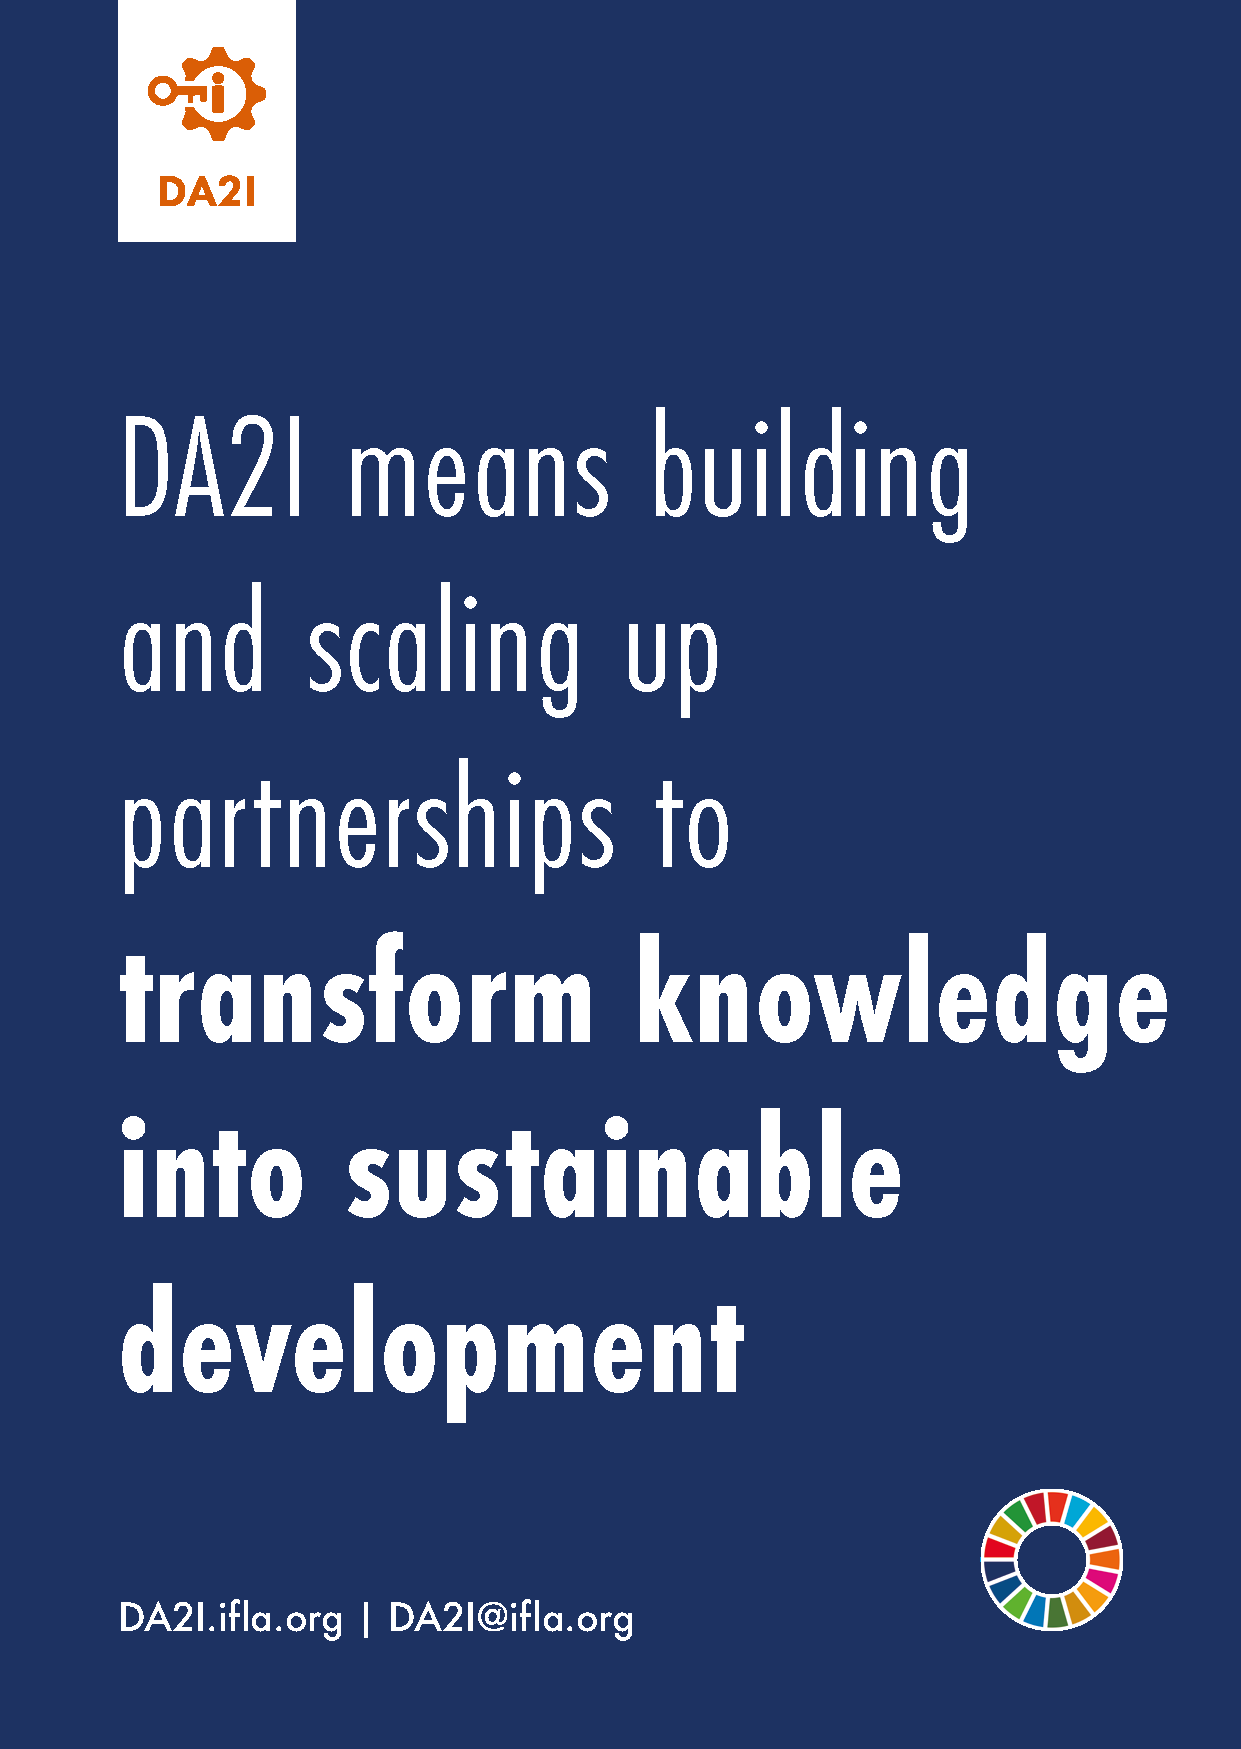 DA2I means building and scaling up partnerships to transform knowledge into sustainable development